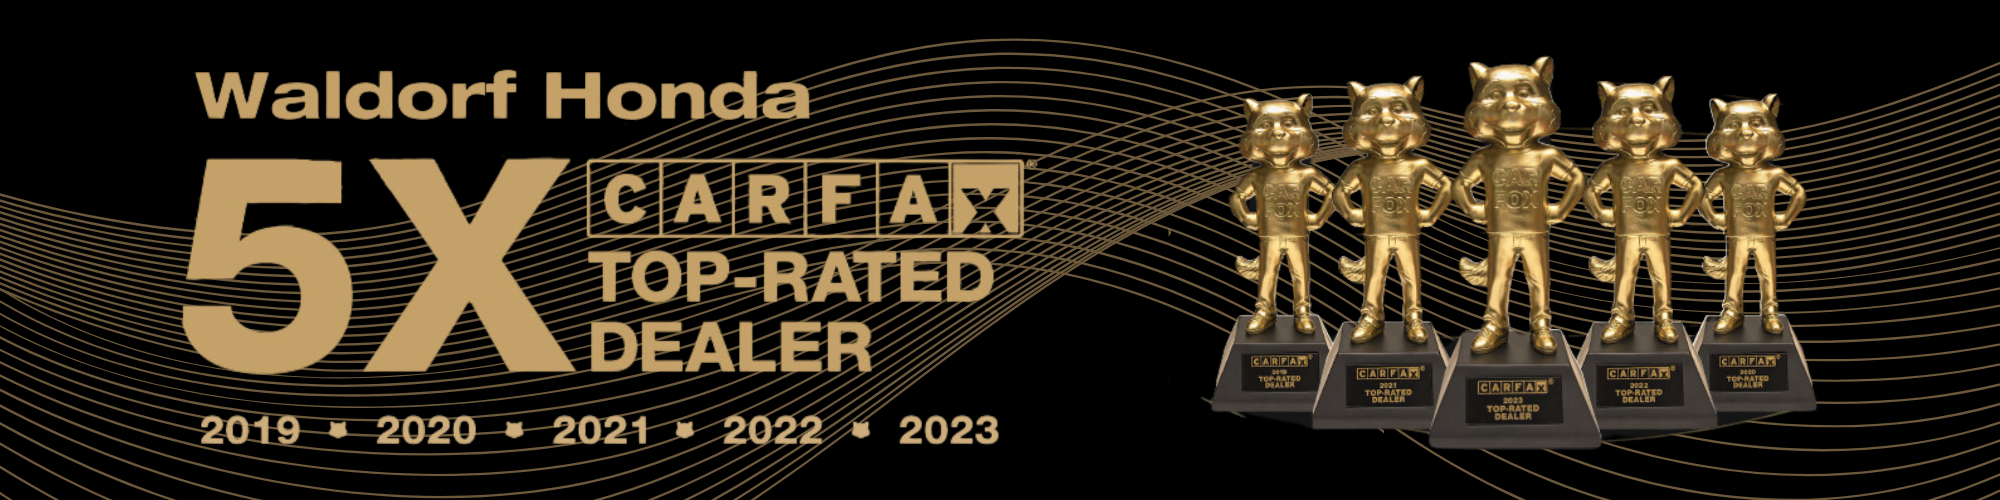 Carfax Top-Rated Dealer 5x Winners!